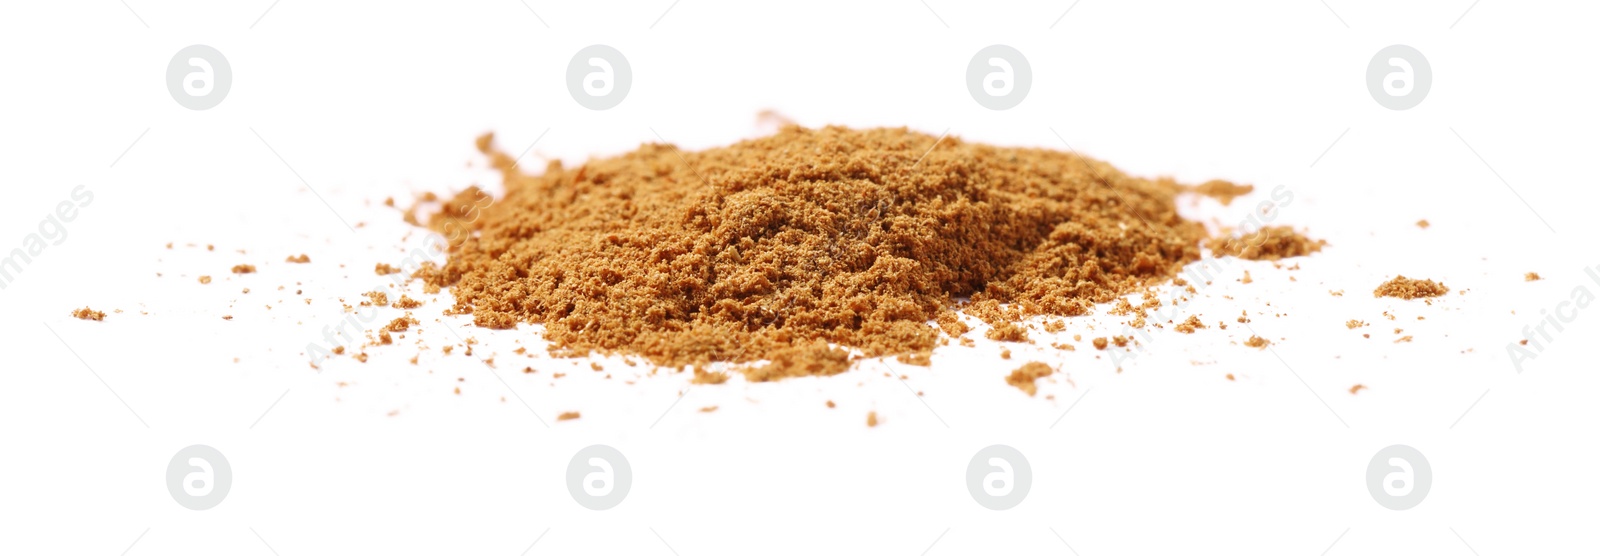 Photo of Dry aromatic cinnamon powder isolated on white